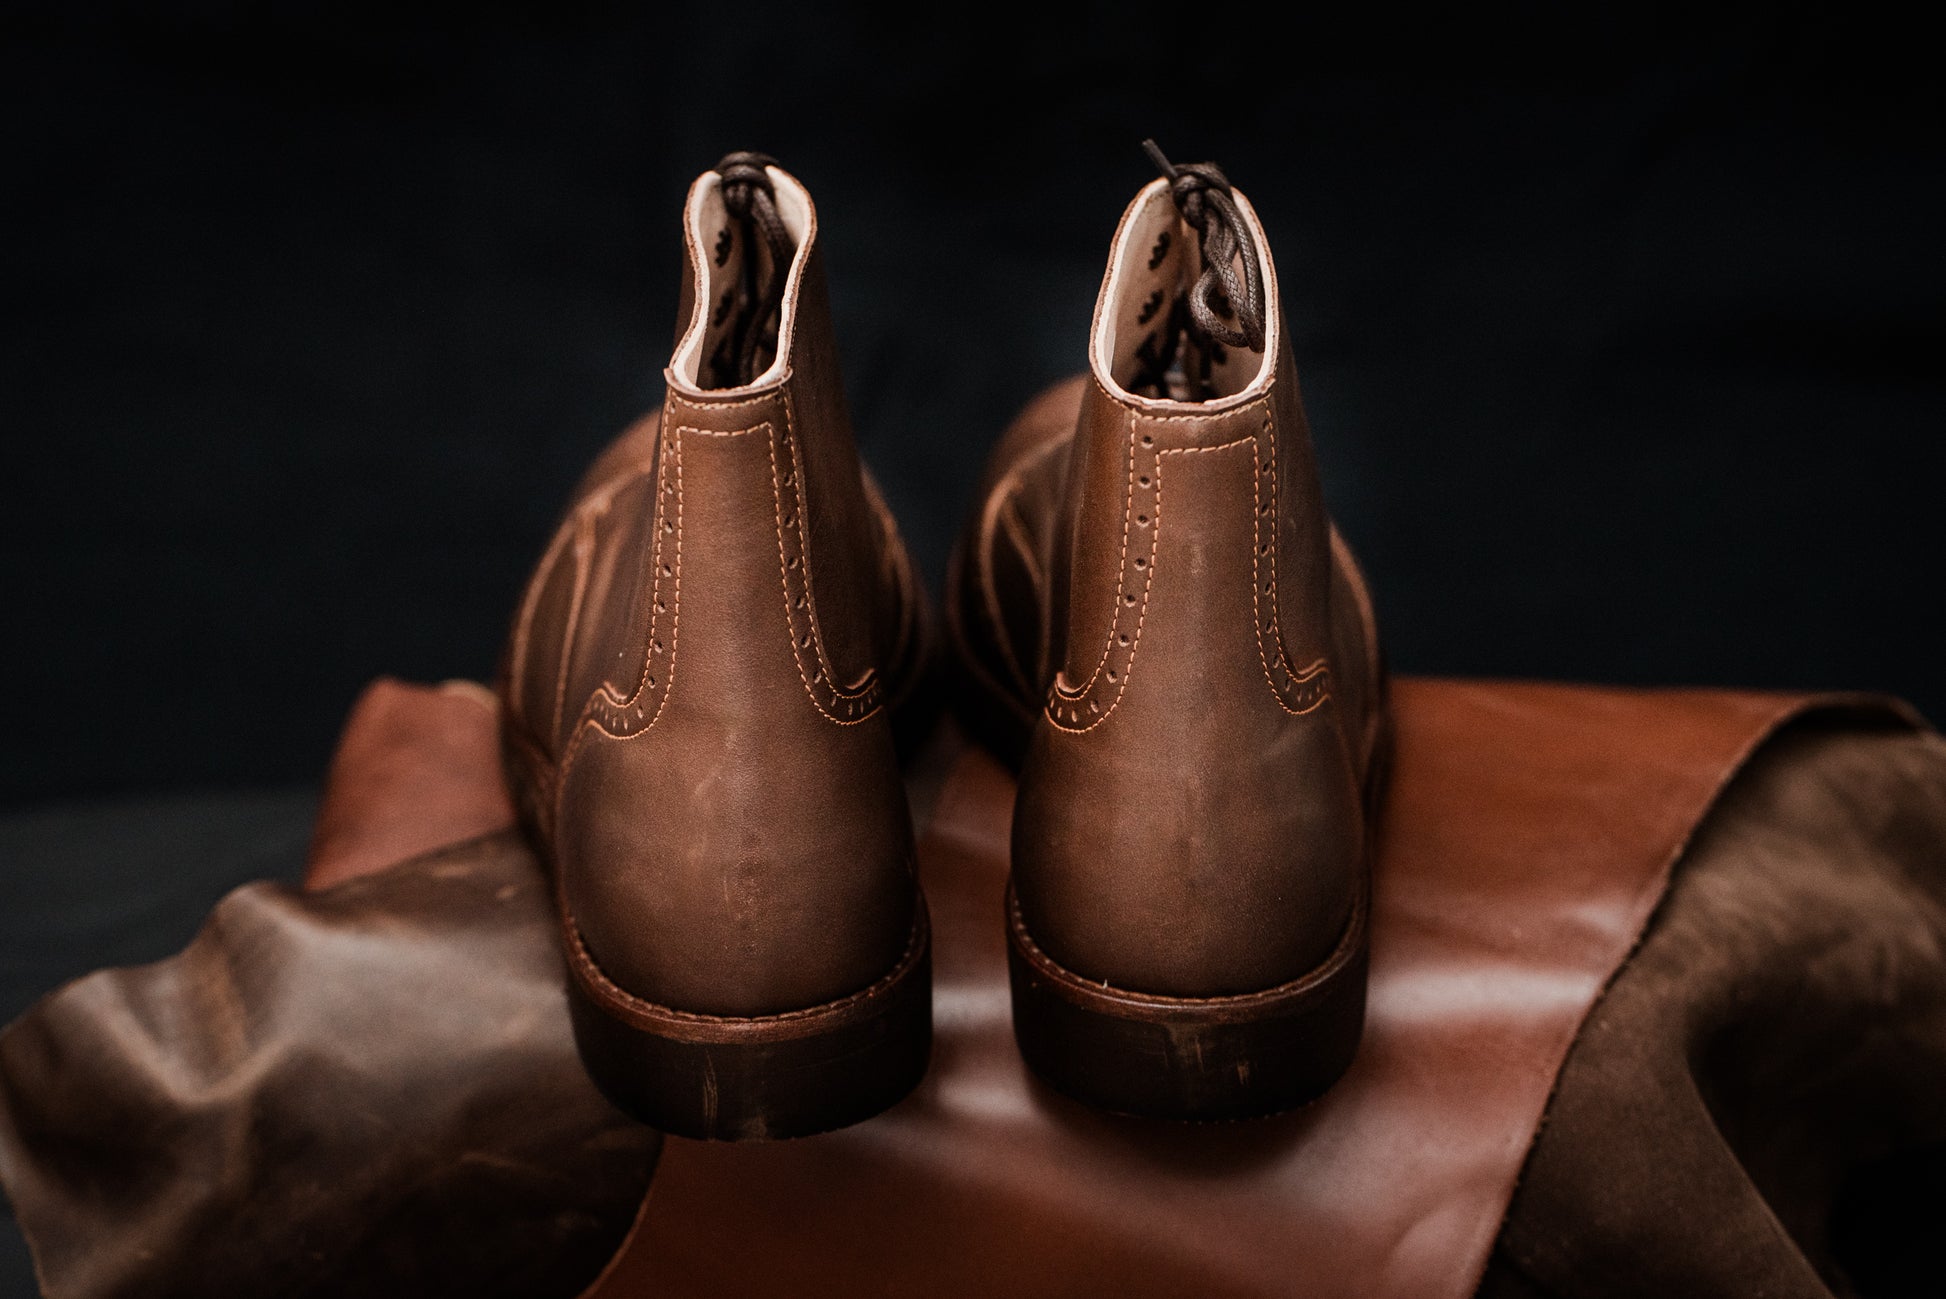 Montejunto Boots - OldMulla - Boots Store, Handmade By George Family